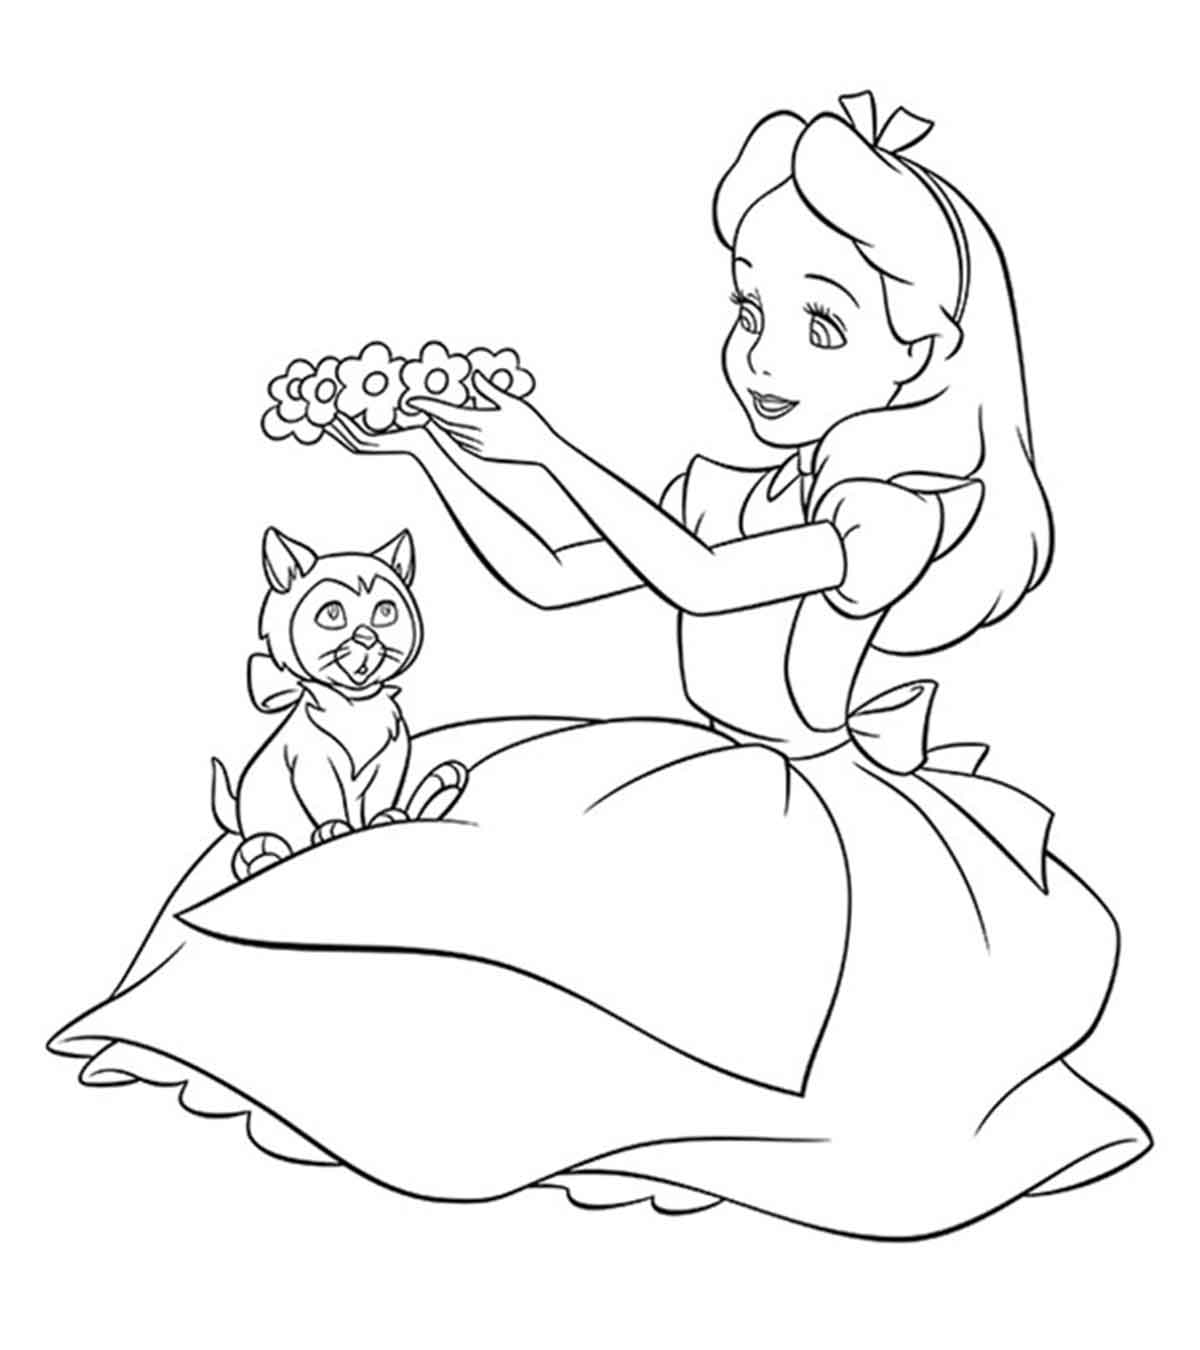 get-coloring-pages-for-adults-disney-gif-colorist